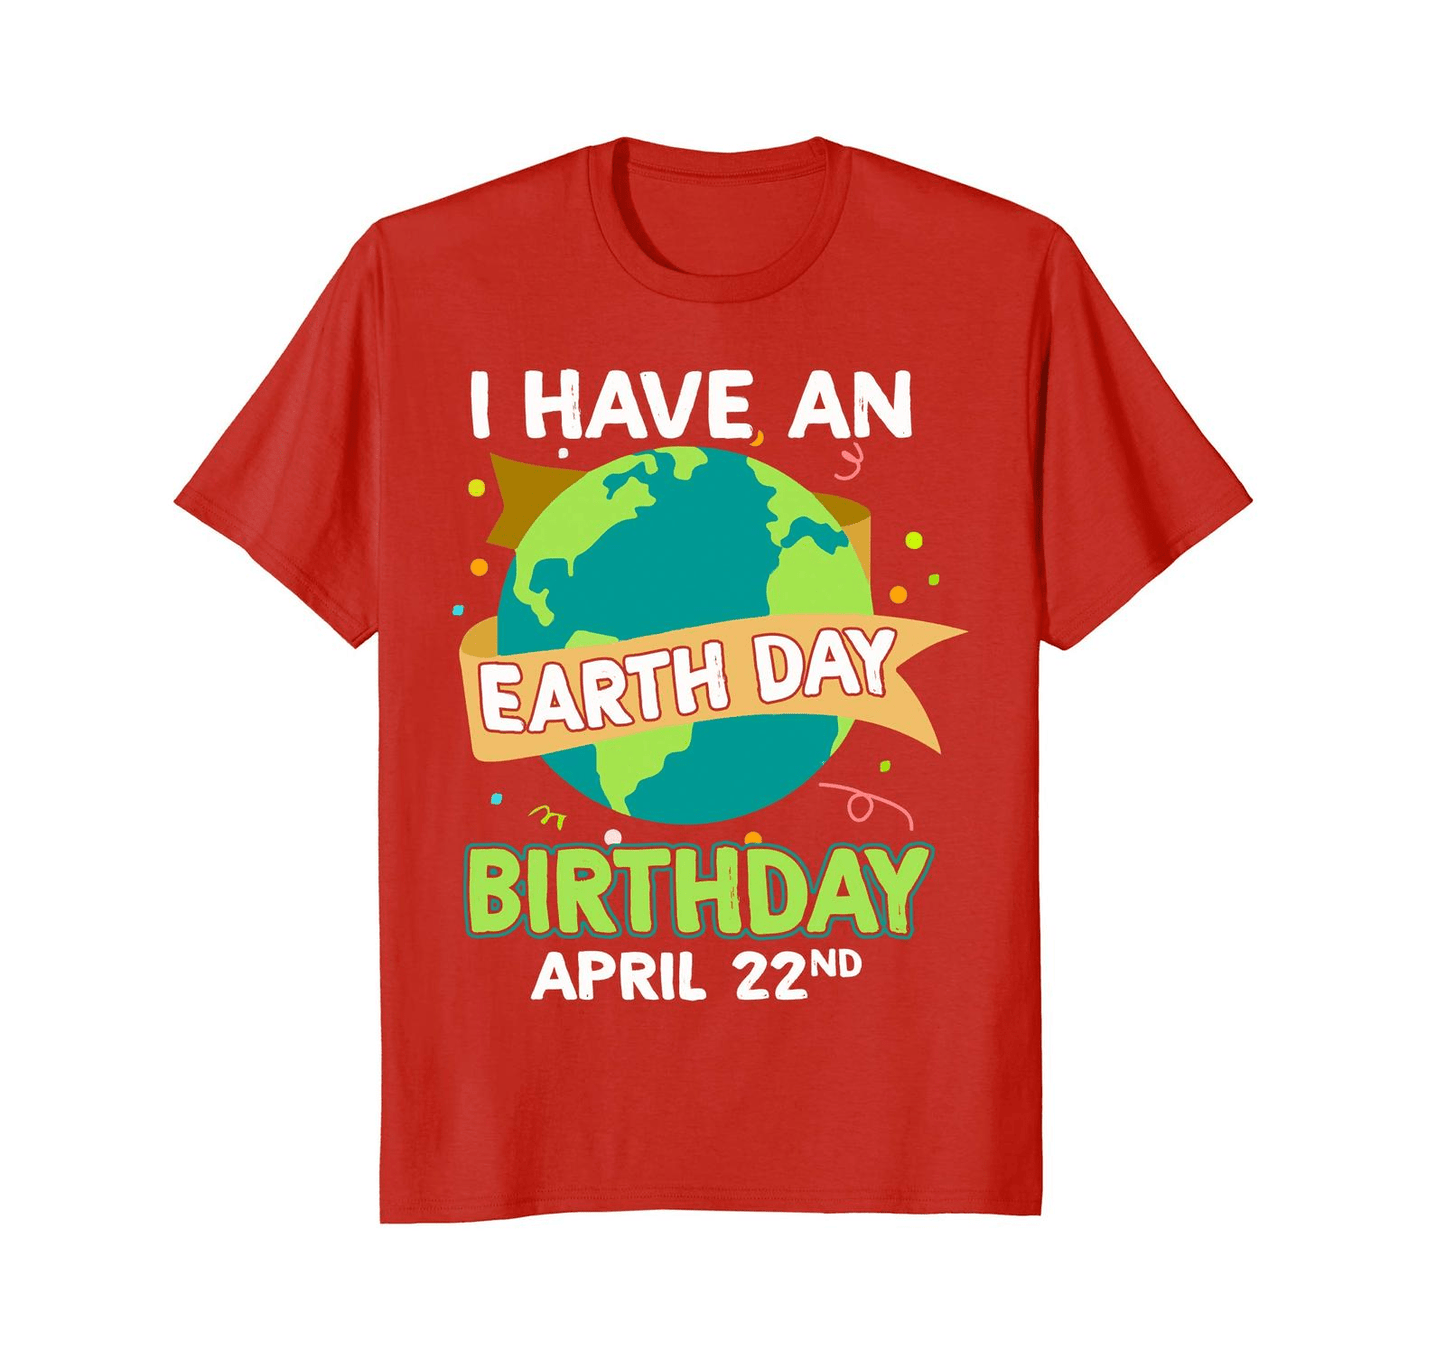 Grafisches Unisex-T-Shirt „I Have an Earth Day Birthday 22nd April Environment Tee Men“. 